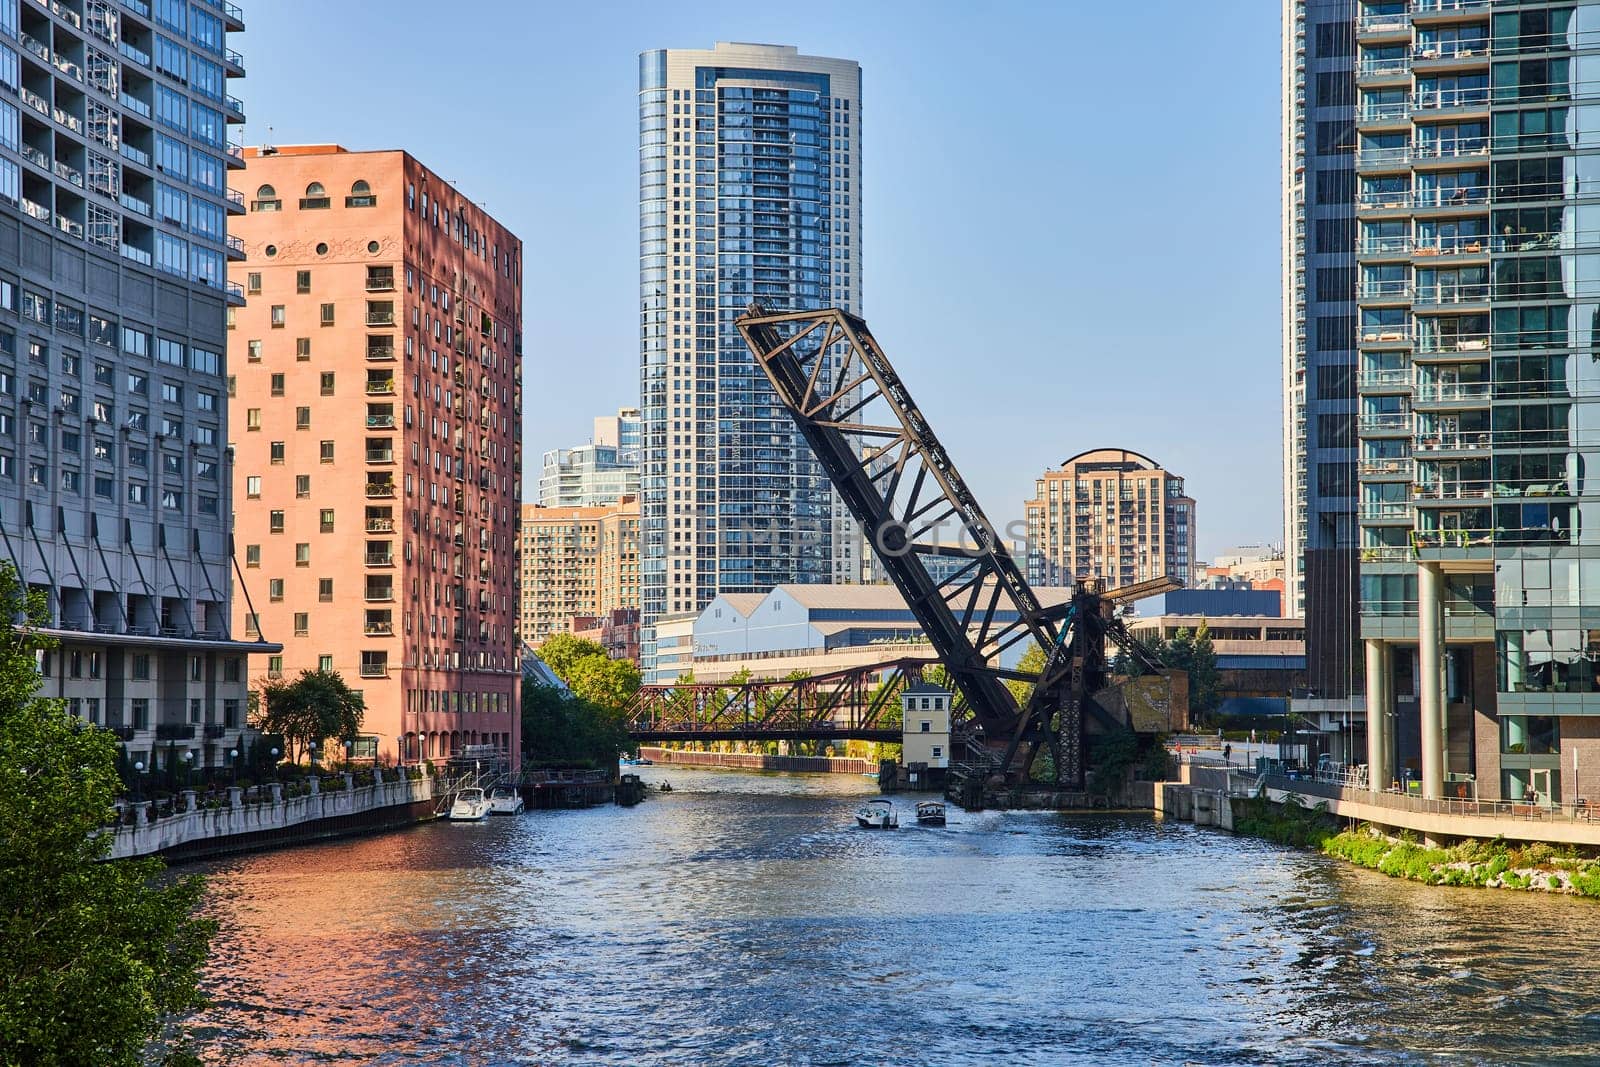 Image of Vertical lift bridge raised over two boats on Chicago canal with skyscrapers on sunny summer day